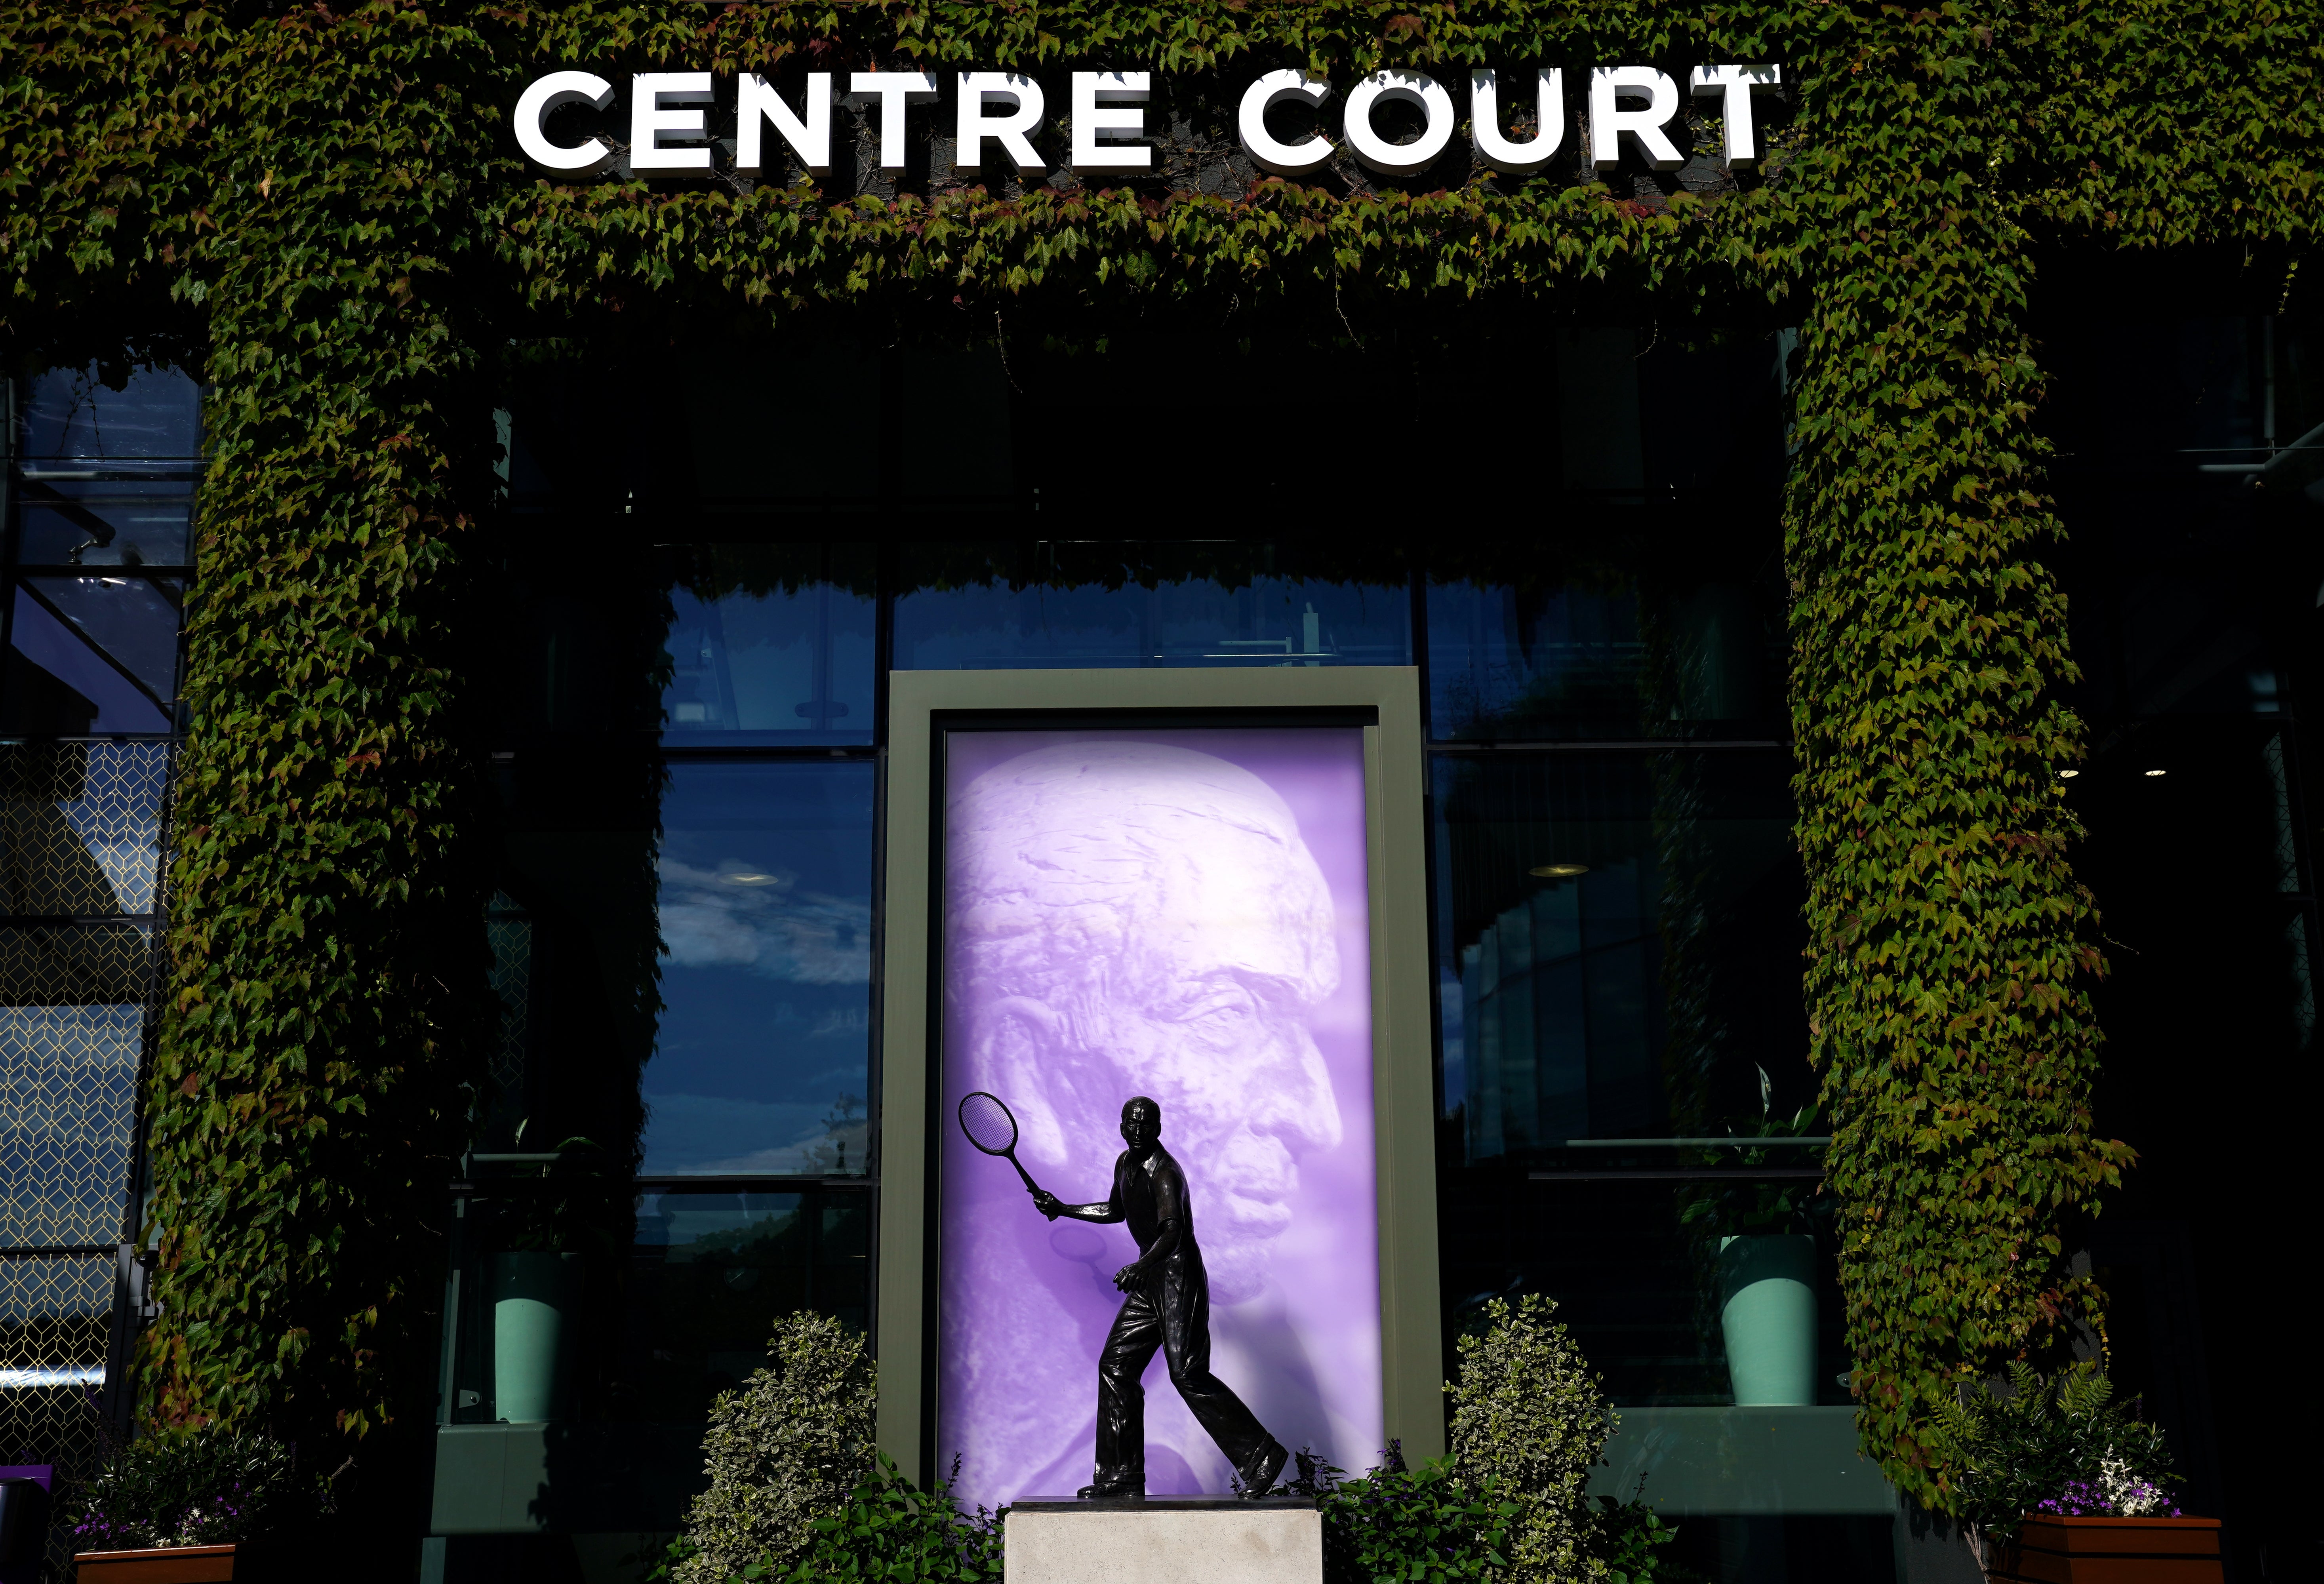 The Fred Perry statue outside Centre Court (John Walton/PA)